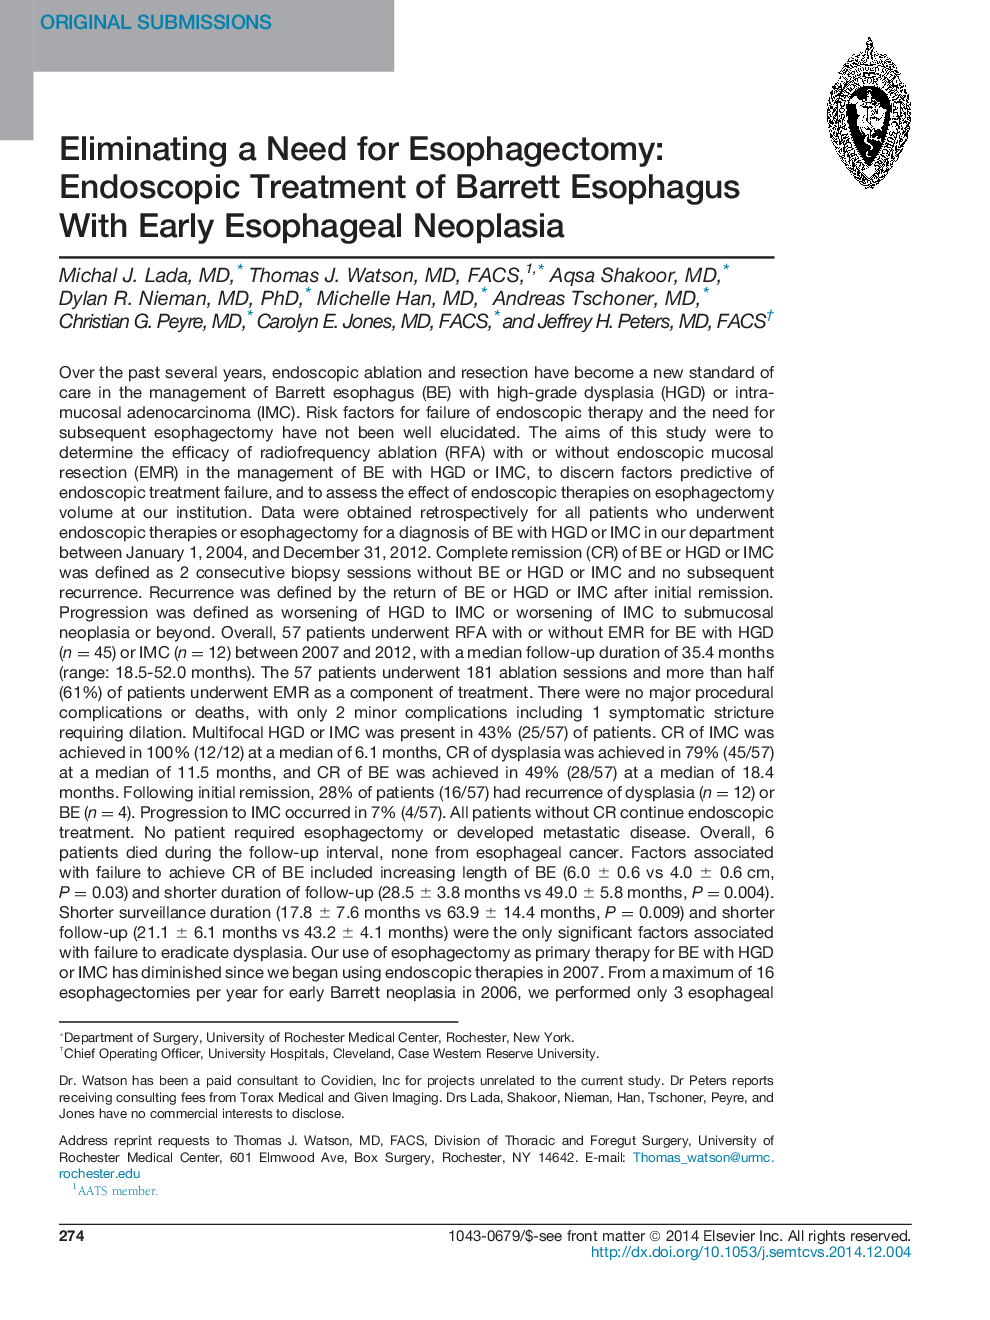 Eliminating a Need for Esophagectomy: Endoscopic Treatment of Barrett Esophagus With Early Esophageal Neoplasia 